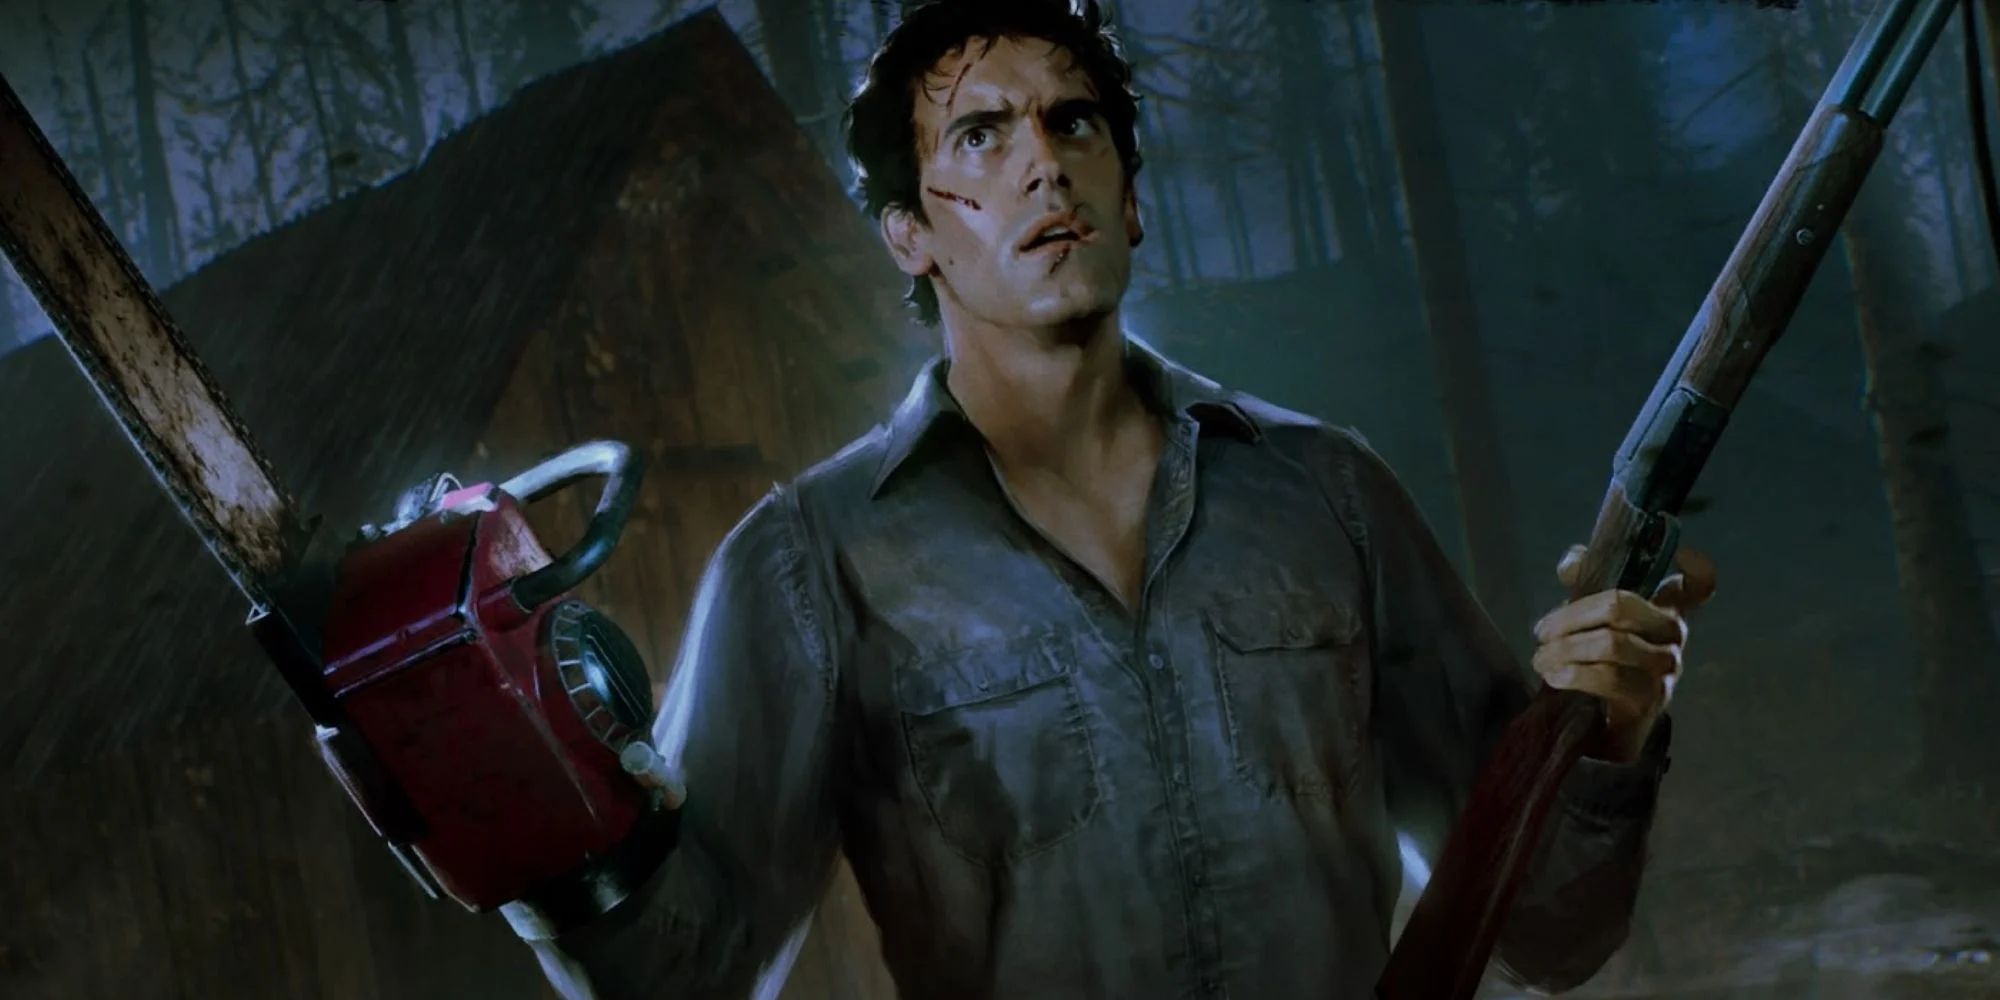 Bruce Campbell as Ash in Ghostbusters 2.